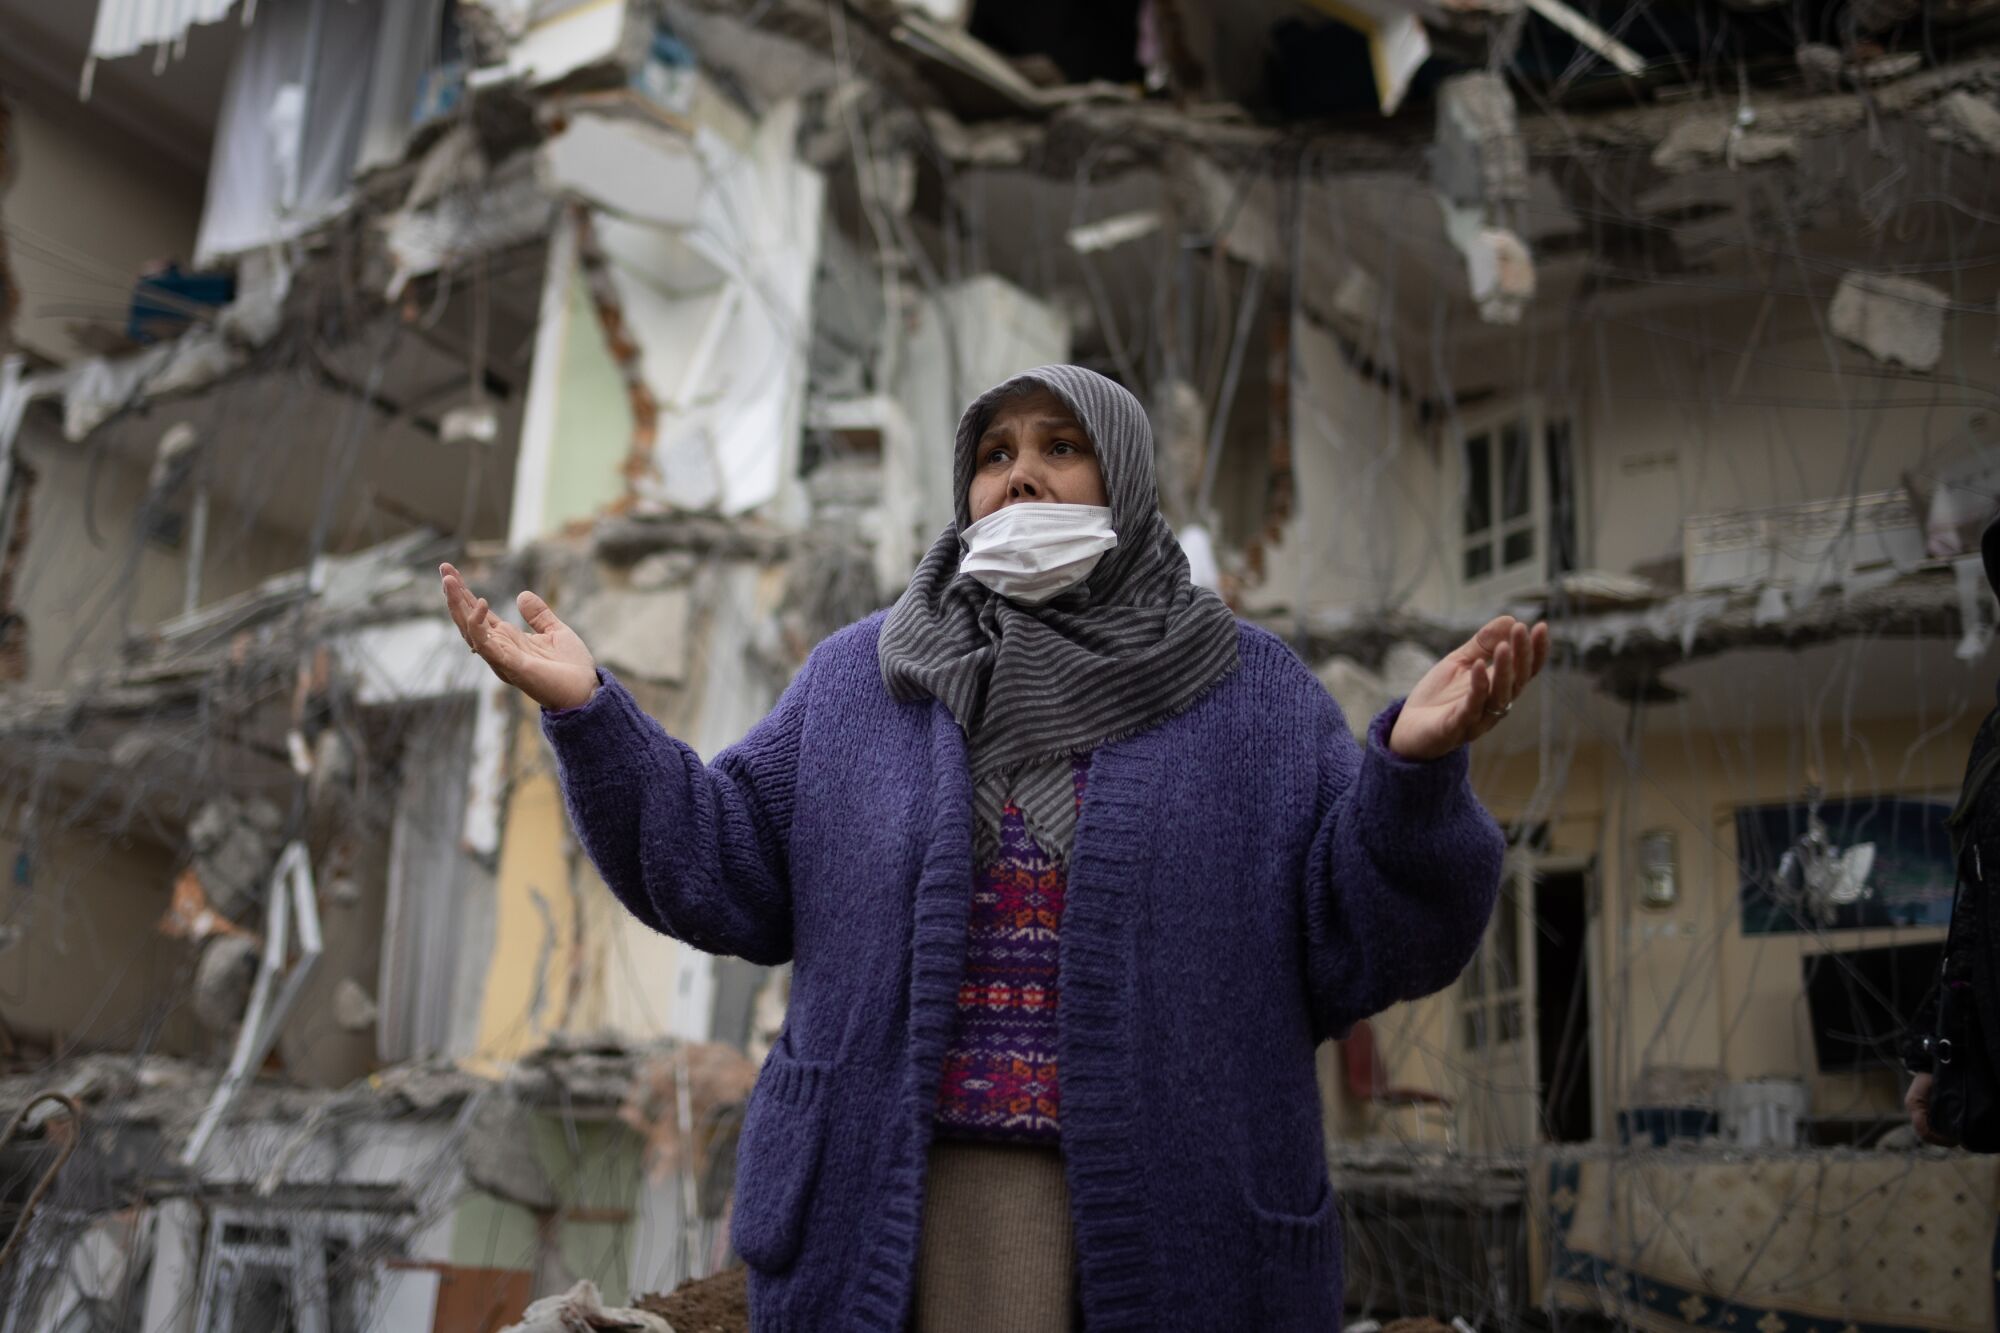 A resident in a head covering holds out her hands in front of her destroyed house.